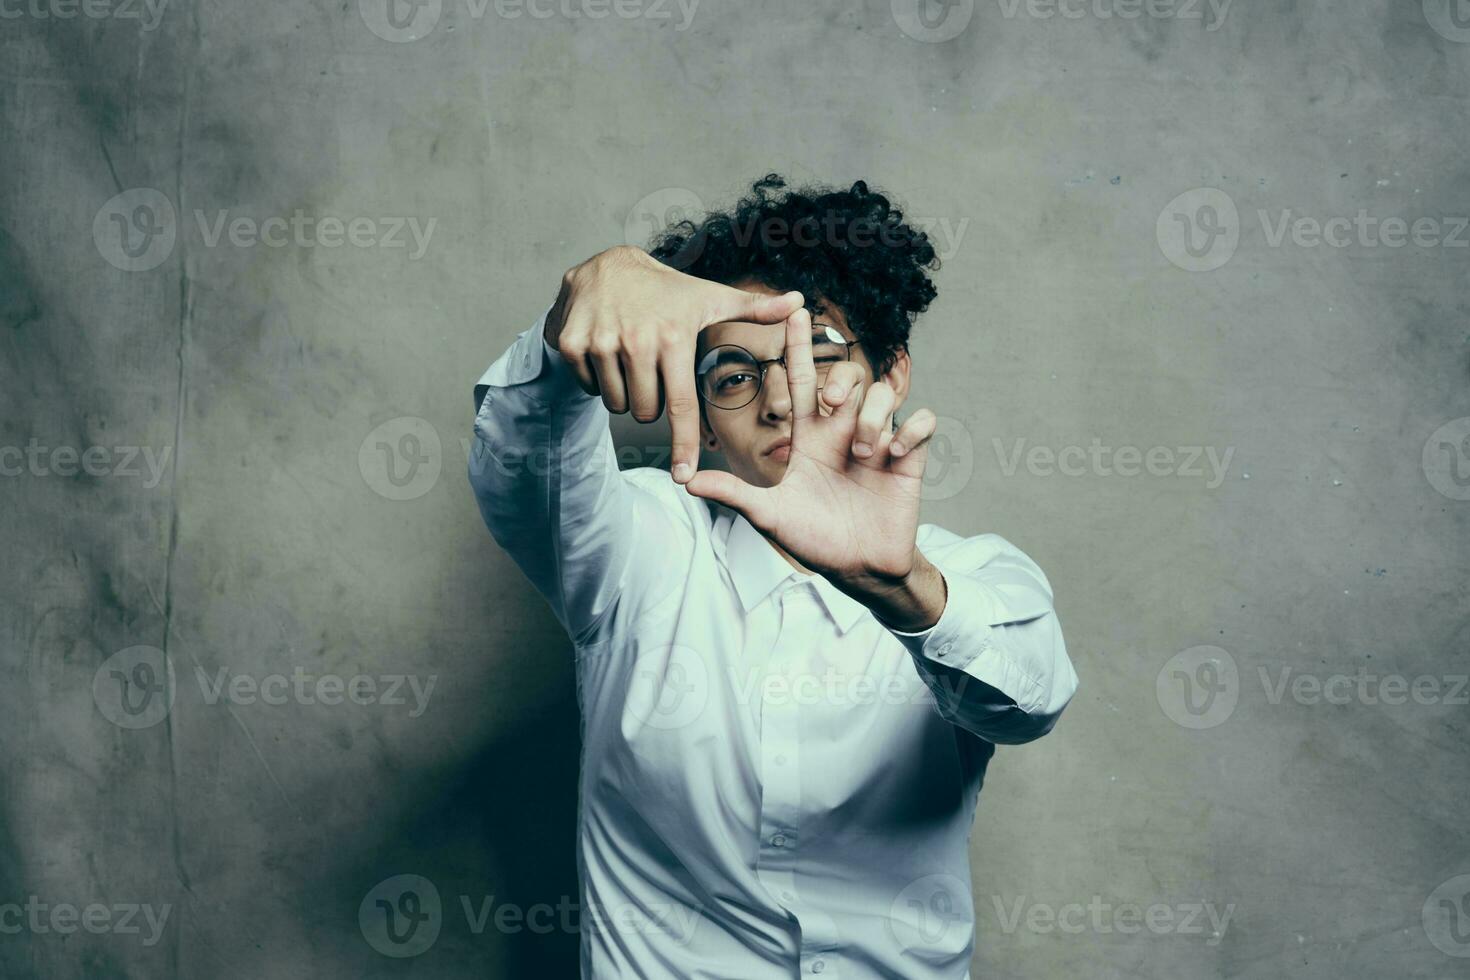 fashionable guy with curly hair gesturing with his hands on a gray background portrait close-up photo